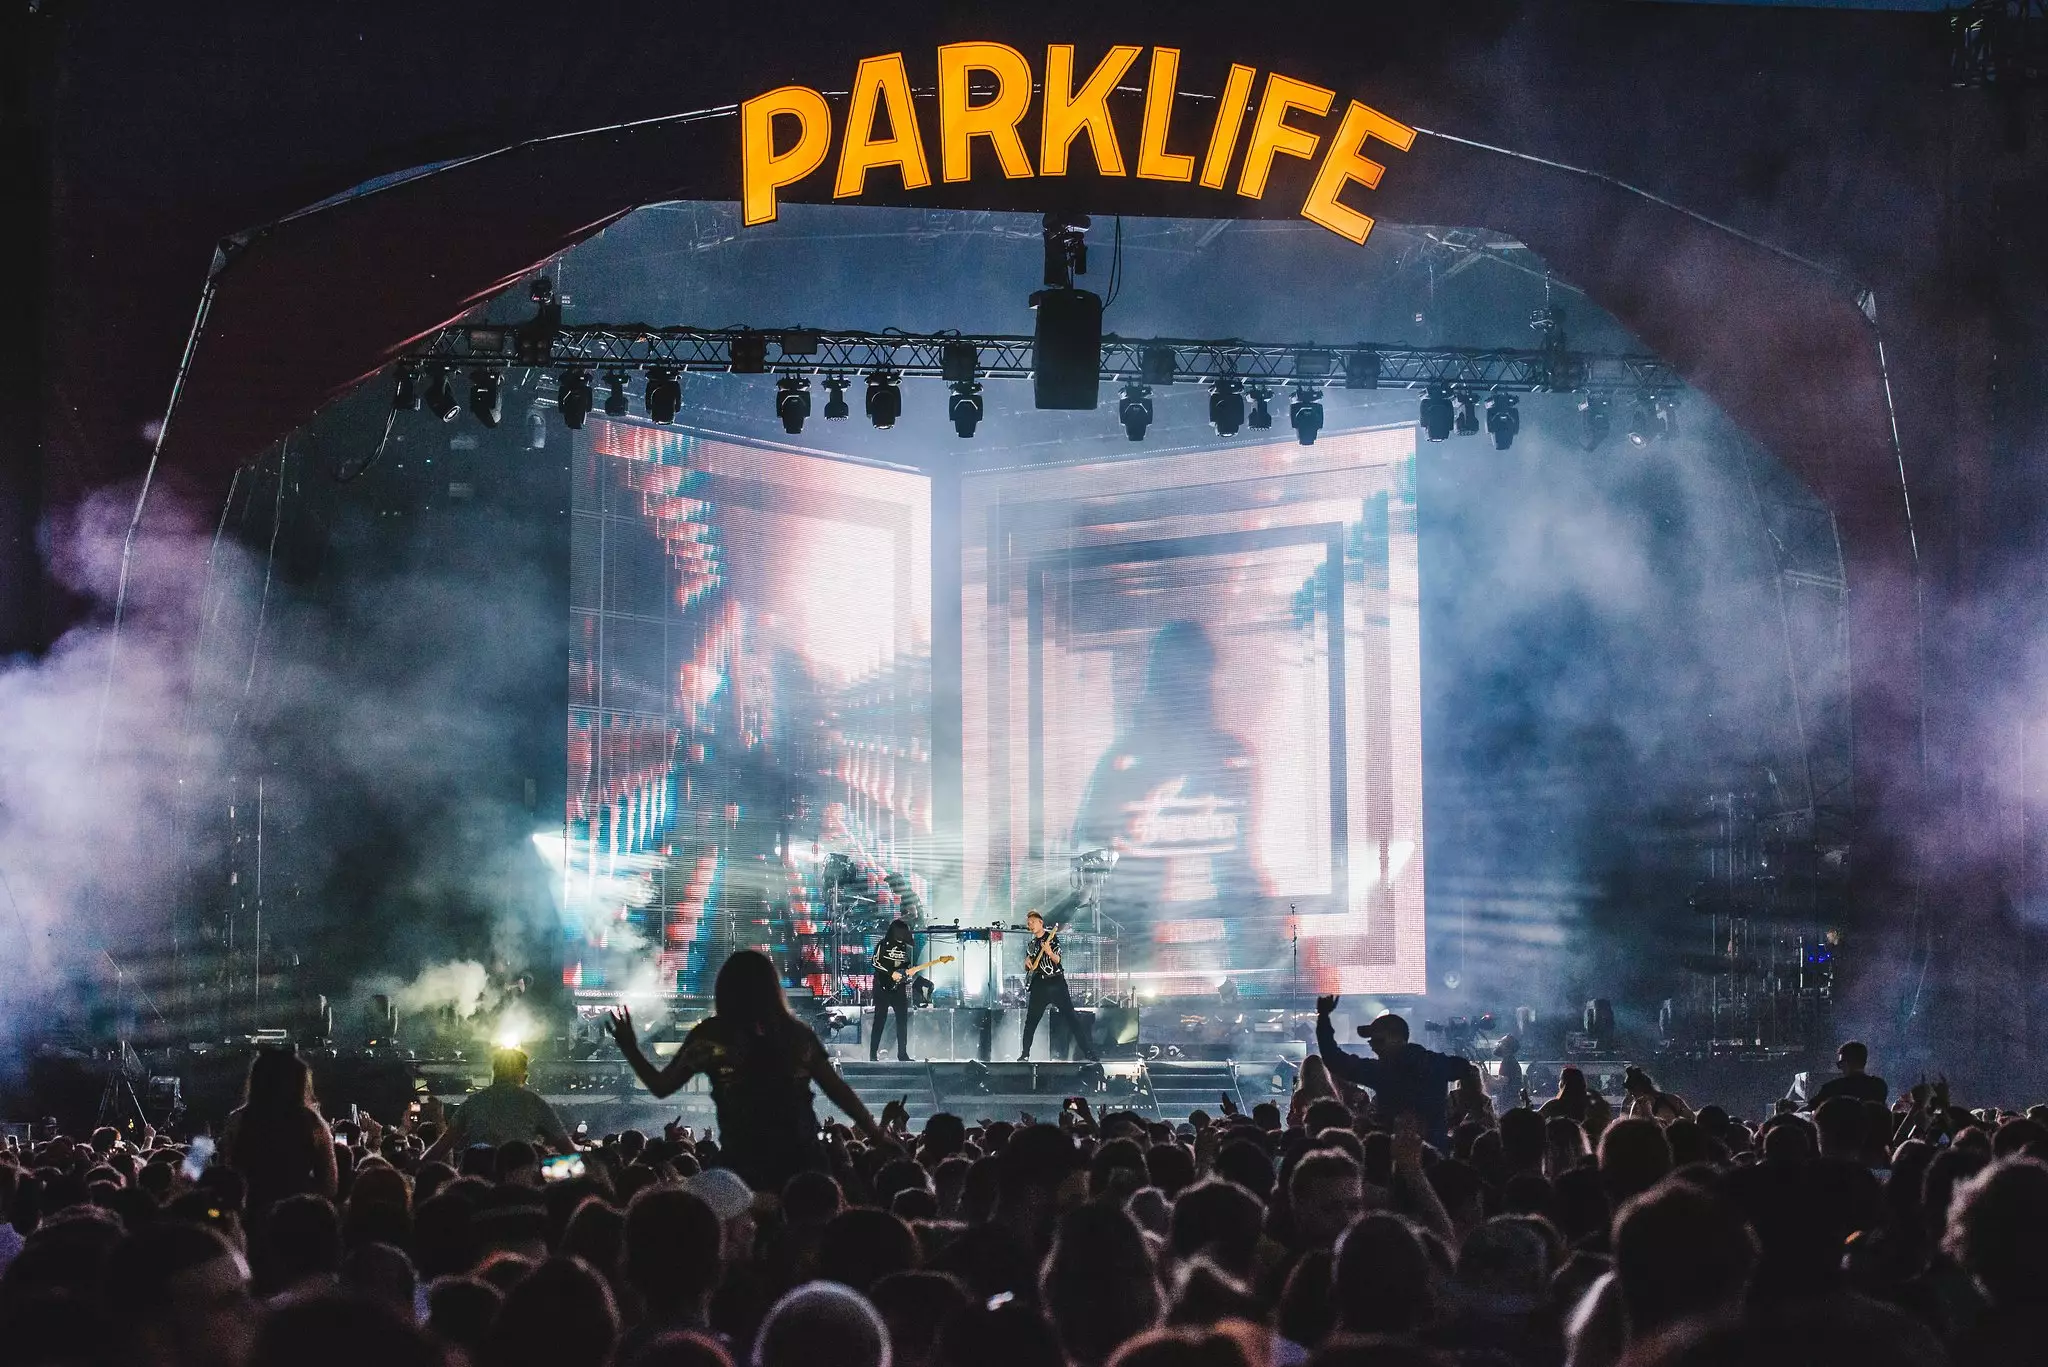 Parklife returns to Manchester's Heaton Park in 2019